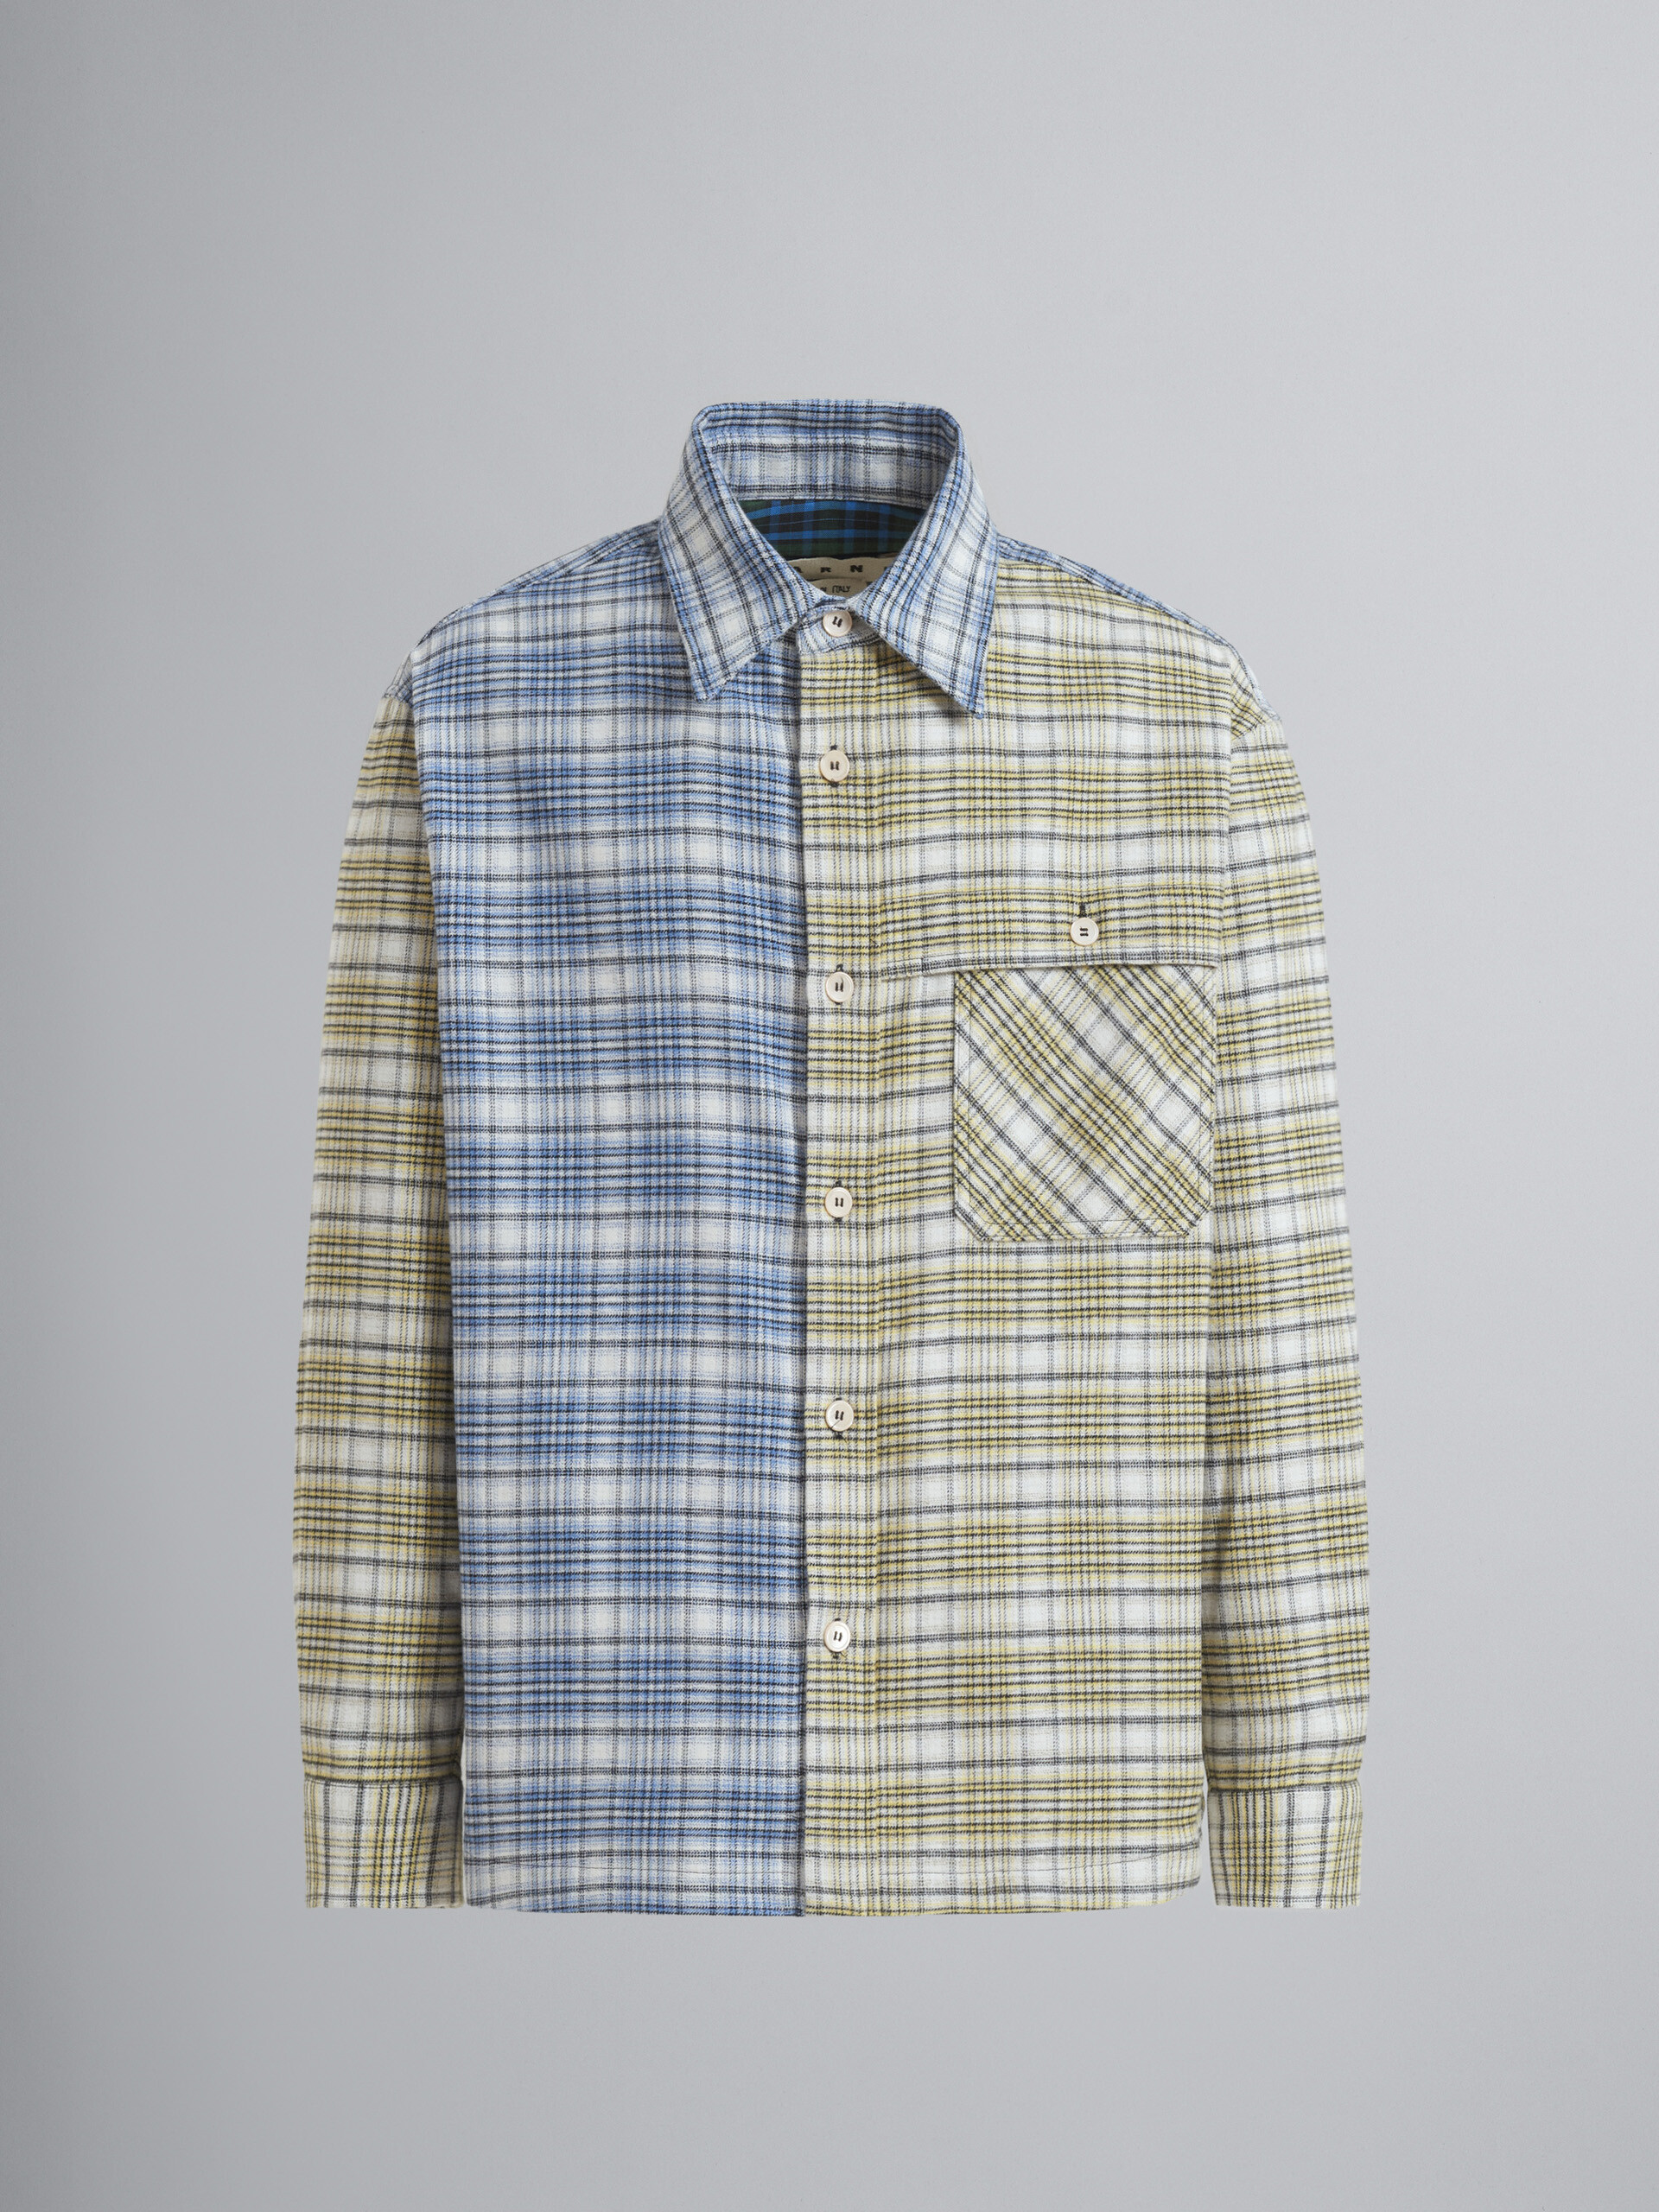 Flannel shirt with colour block check pattern - Shirts - Image 1